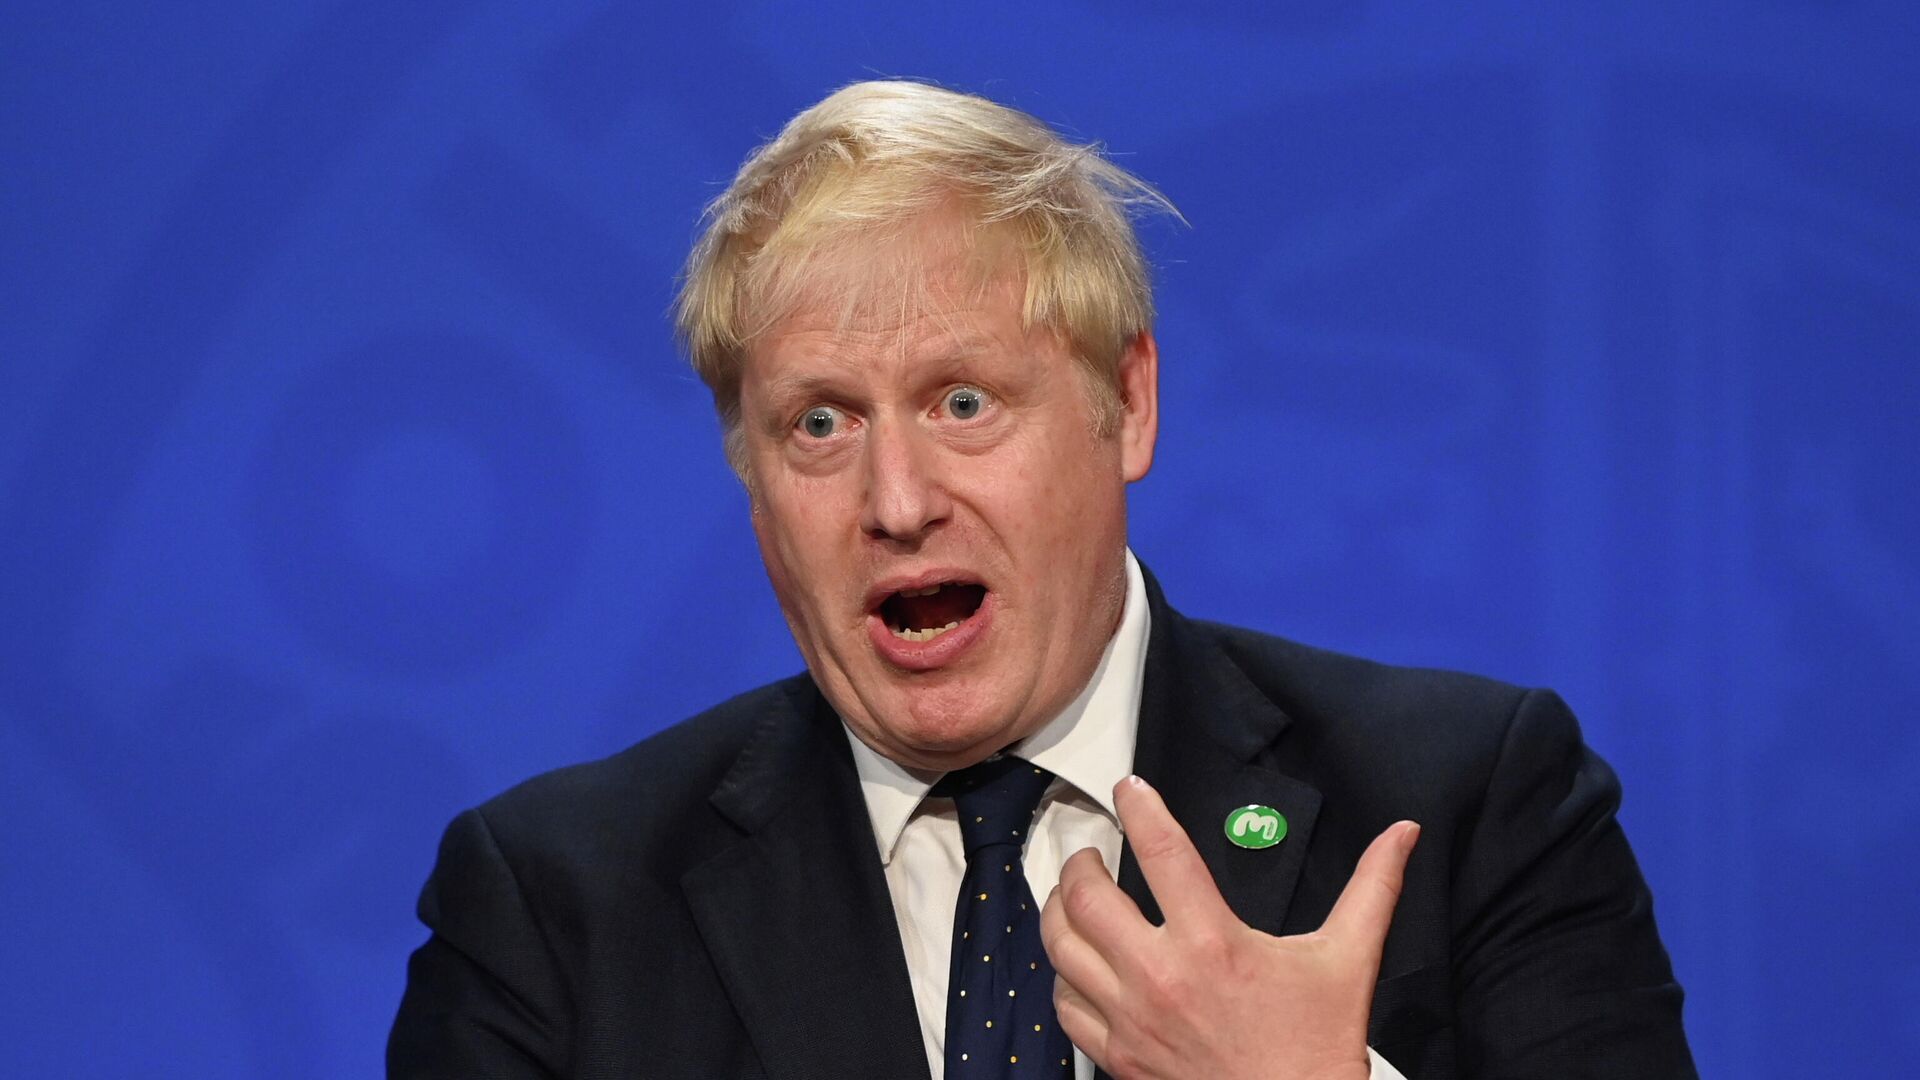 Britain's Prime Minister Boris Johnson gestures as he speaks during a news conference with Britain's Chancellor of the Exchequer Rishi Sunak and Britain's Health Secretary Sajid Javid (not pictured) in Downing Street, in London, Britain, September 7, 2021 - Sputnik International, 1920, 05.10.2021